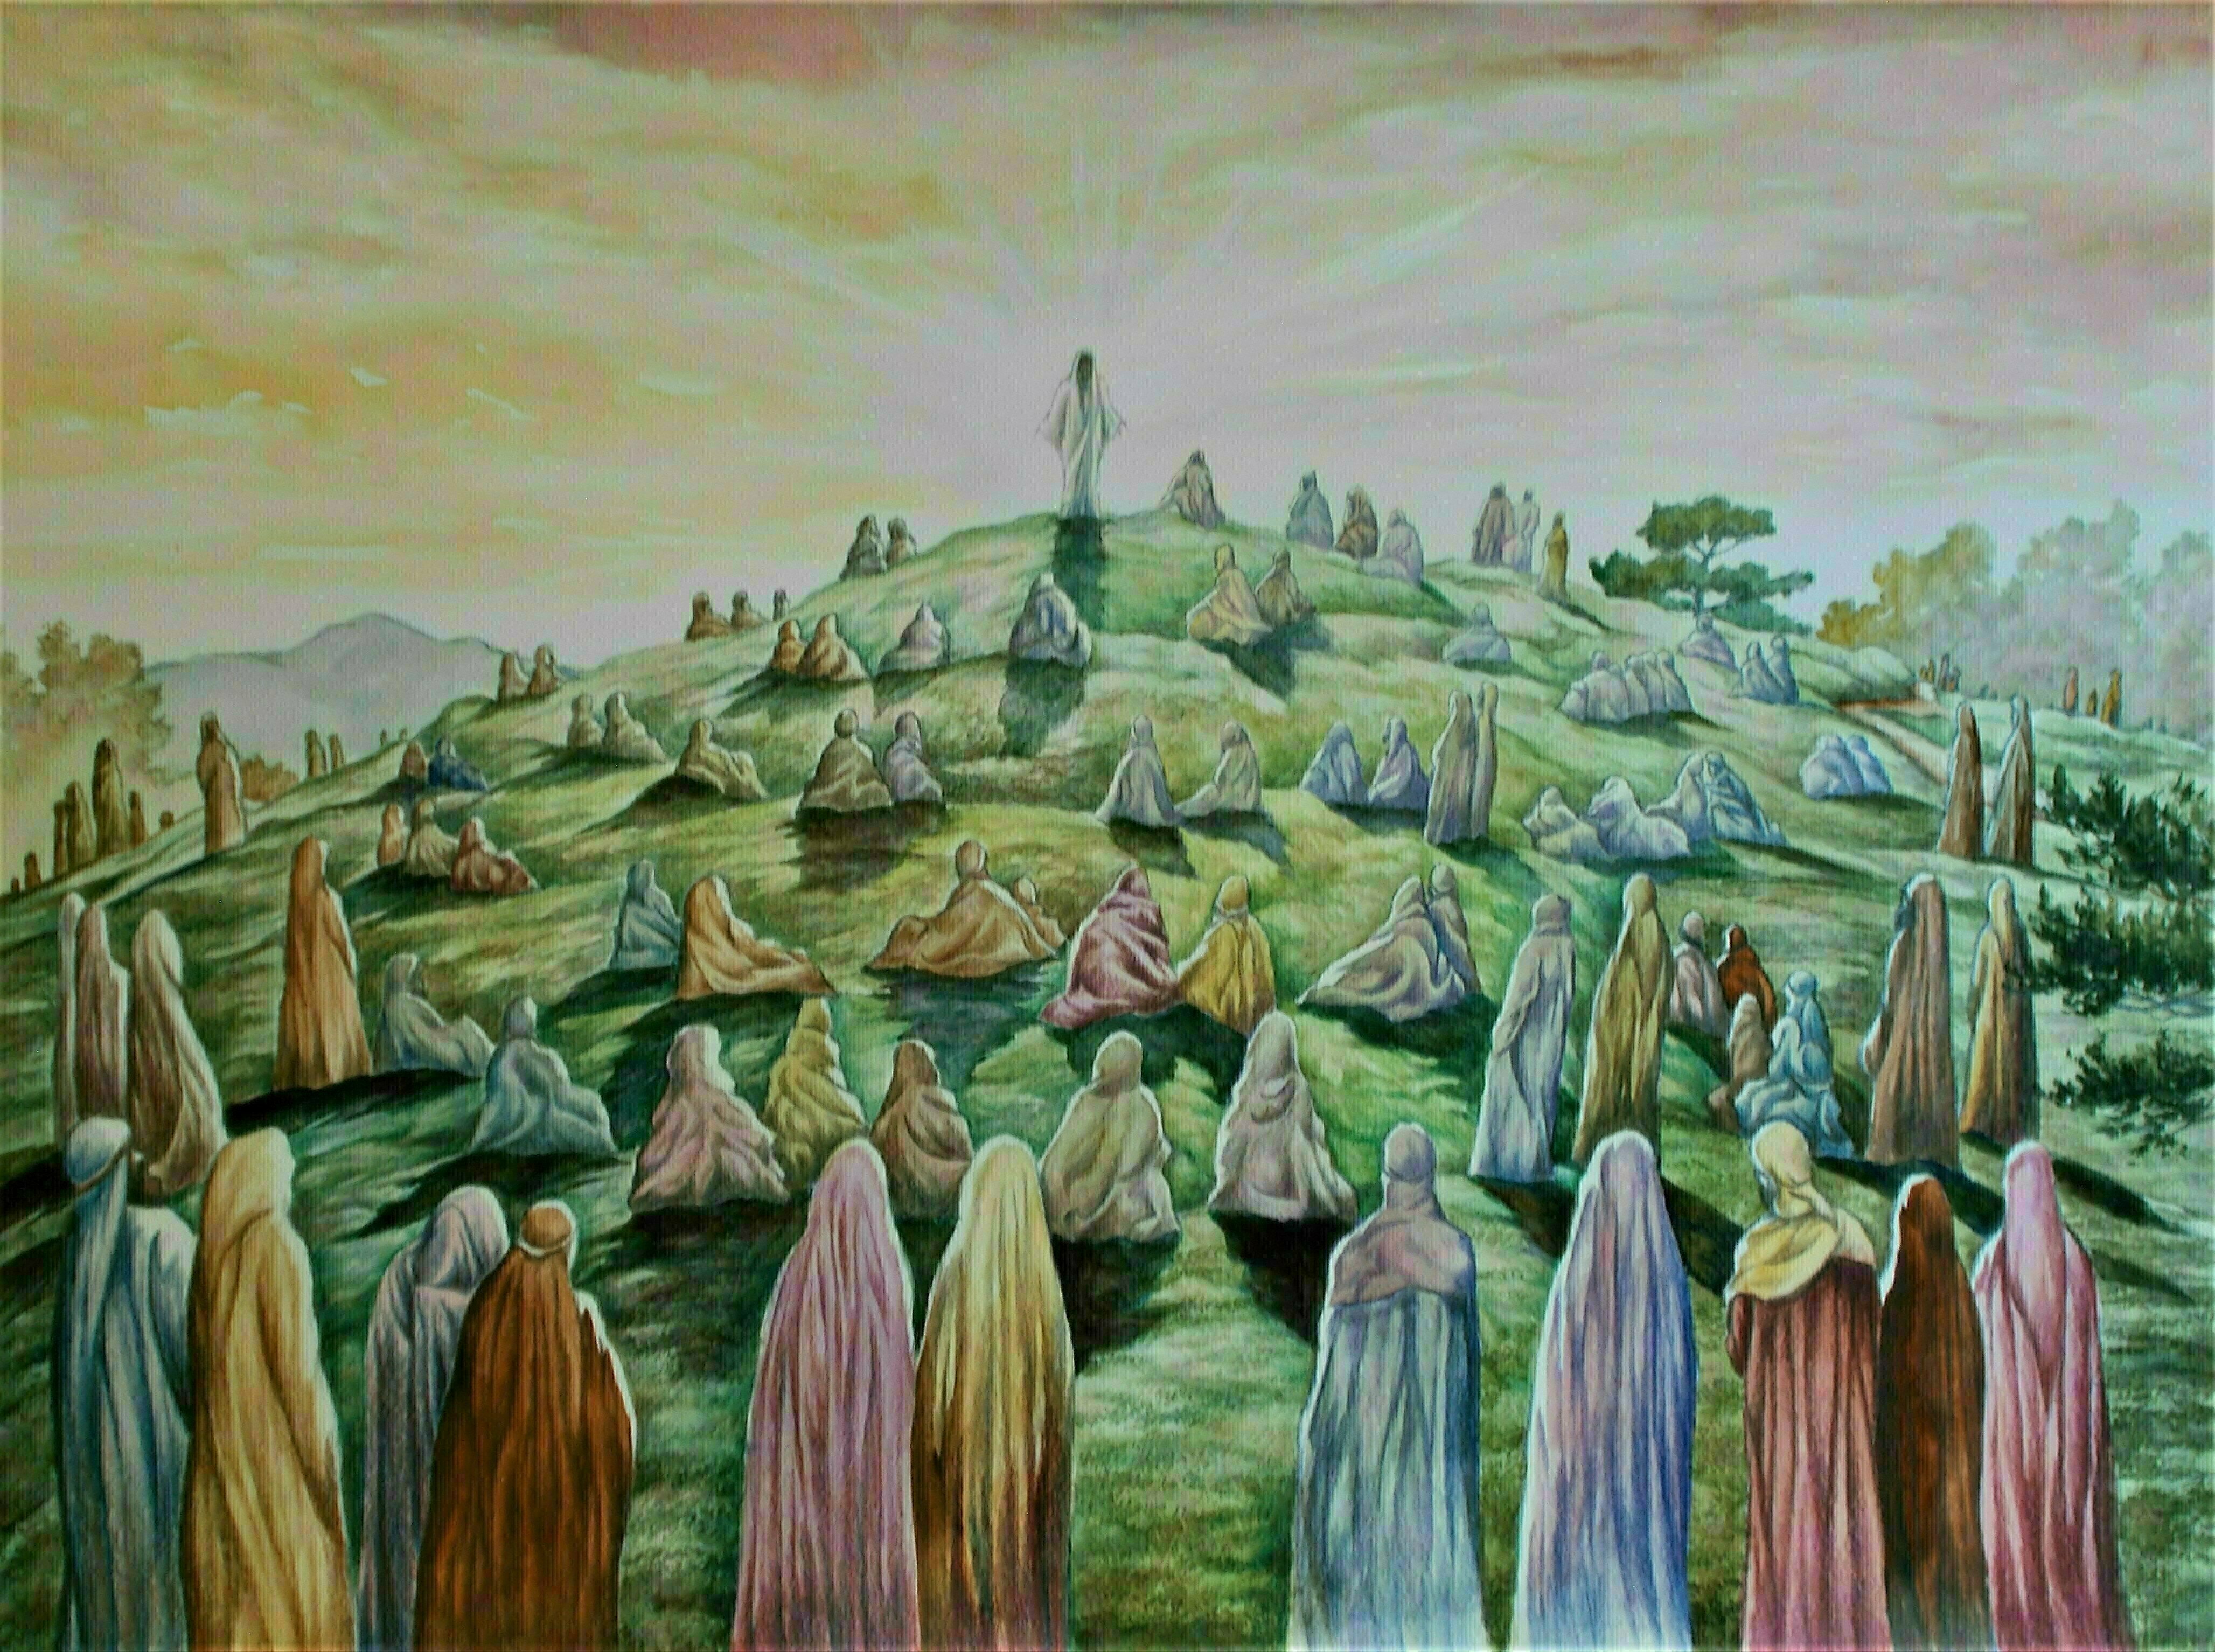 J Collins; Jesus Sermon On The Mount, 2013, Original Illustration, 24 x 18 inches. Artwork description: 241 Jesus delivers the blessings and attitudes for His followers on the mount...